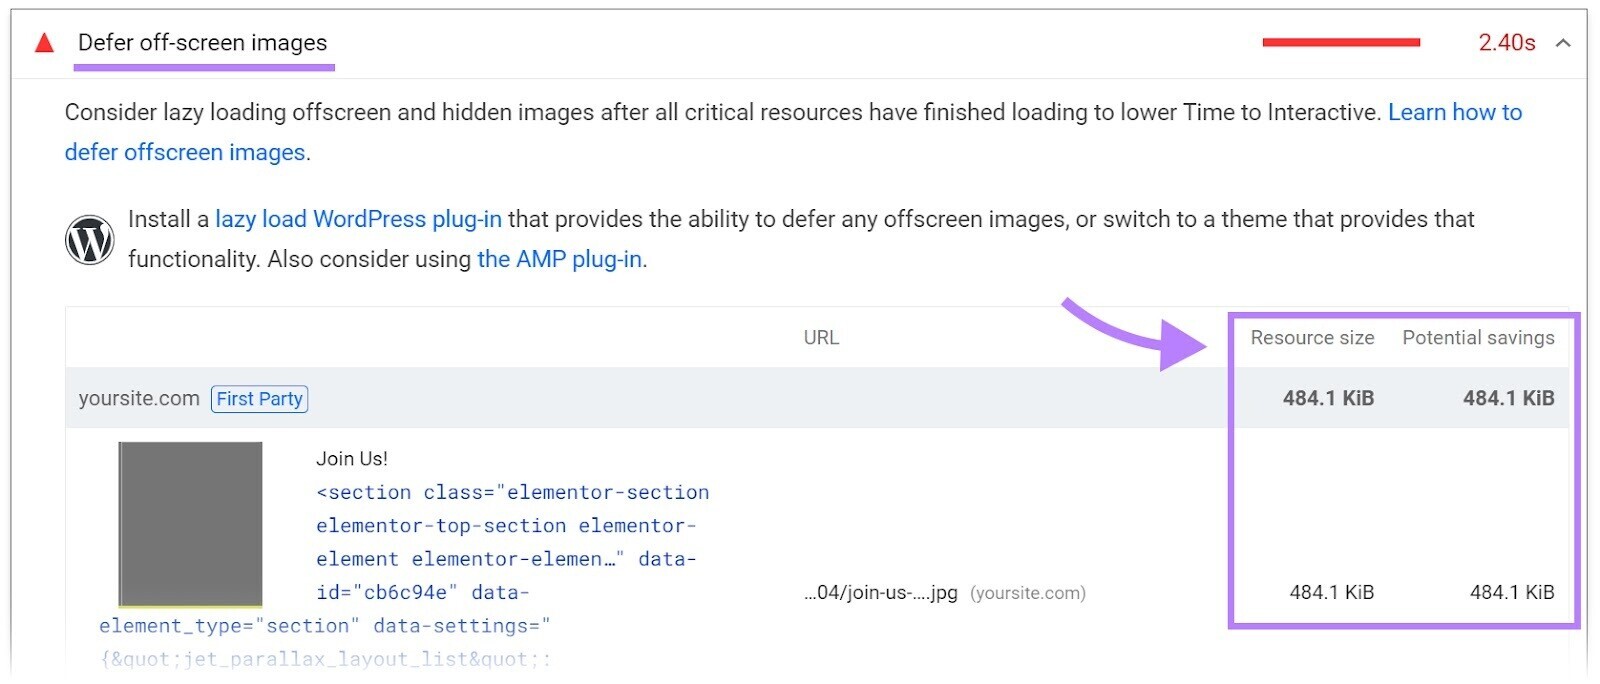 "Defer off-screen images" shows resource size and potential savings for images on PSI Diagnostics.